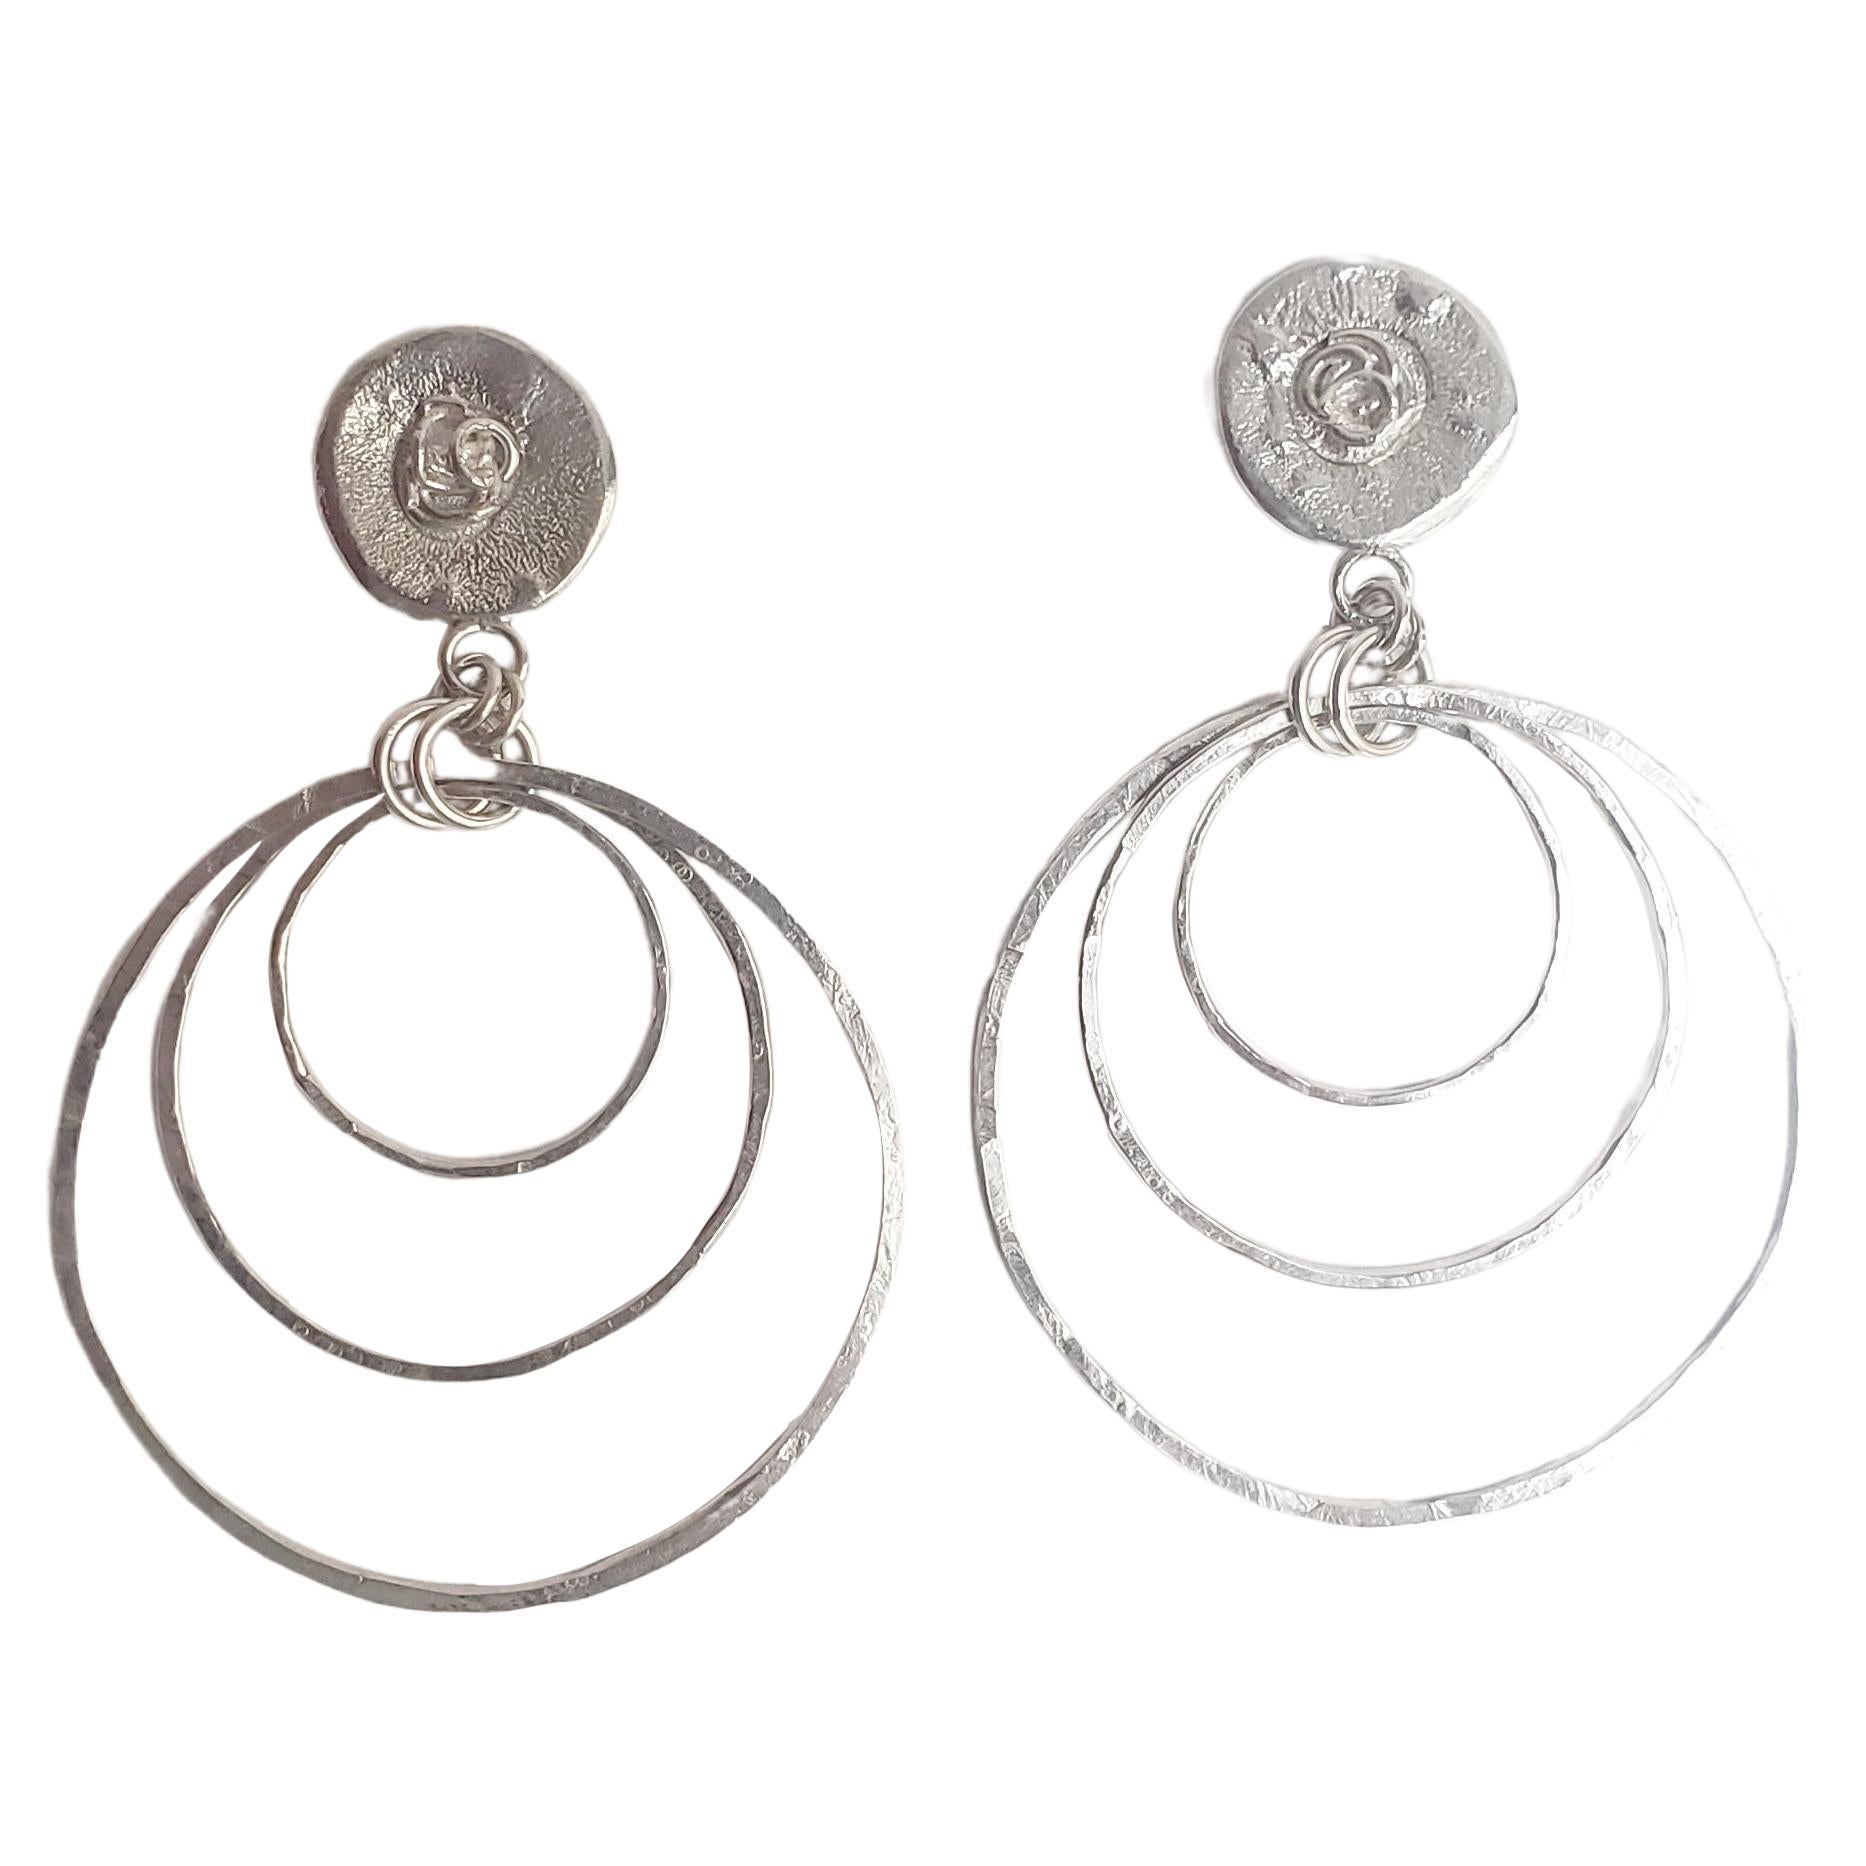 Robin Erfe-Dulce Medallion Earrings- Sterling Silver Hand Hammered Hoops For Sale